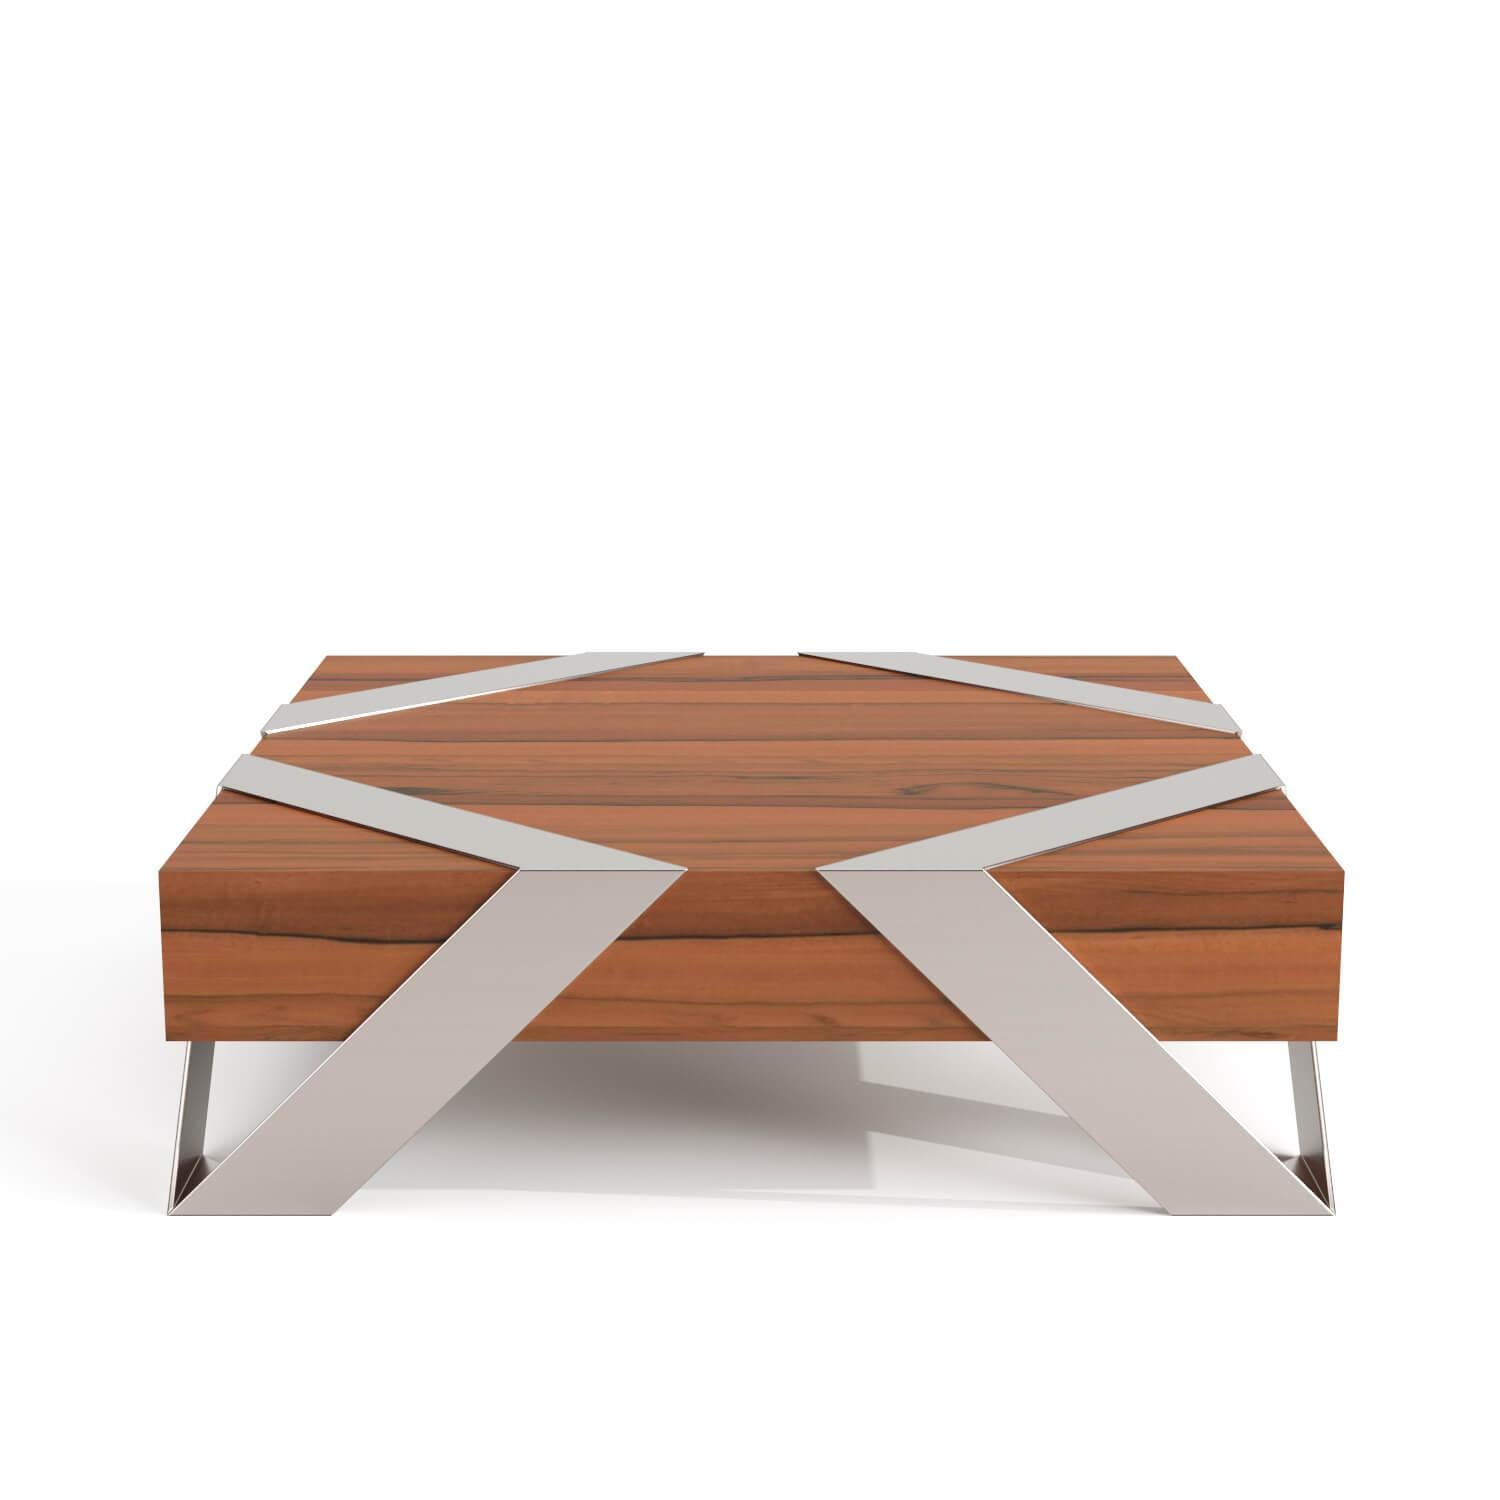 Portuguese Modern Minimalist Square Center Coffee Table Walnut Wood Brushed Stainless Steel For Sale